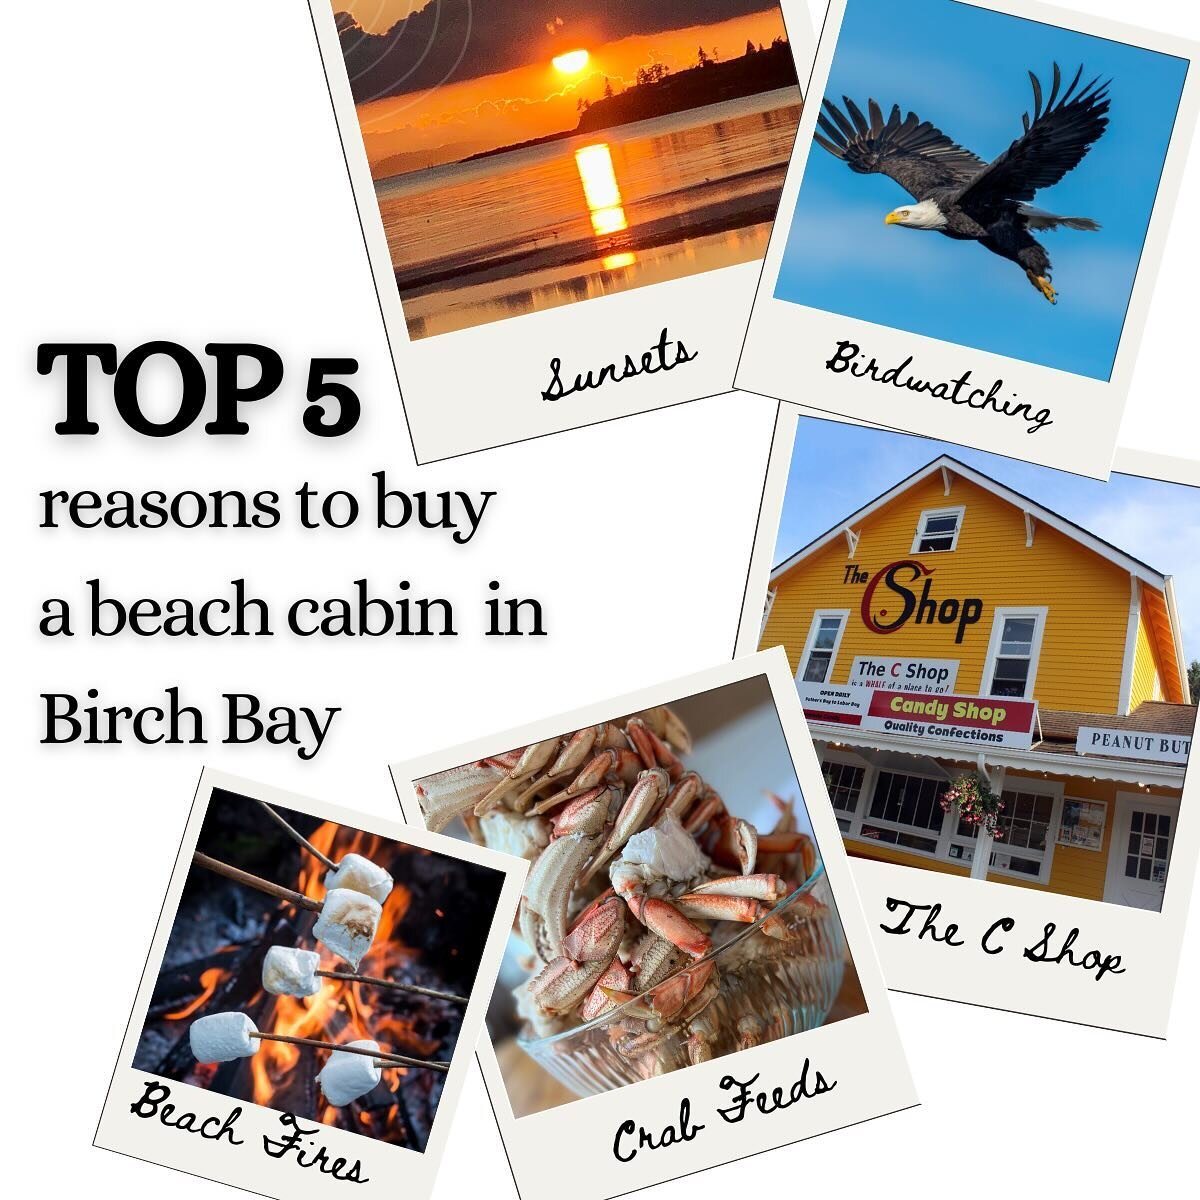 My personal &ldquo;Top 5&rdquo; to buy a cabin at the bay. Here&rsquo;s a few more&hellip;
Golf cart zone, best 4th of July in the country, festivals throughout the year, beach combing for driftwood, walking the berm&hellip; the list goes on &amp; on